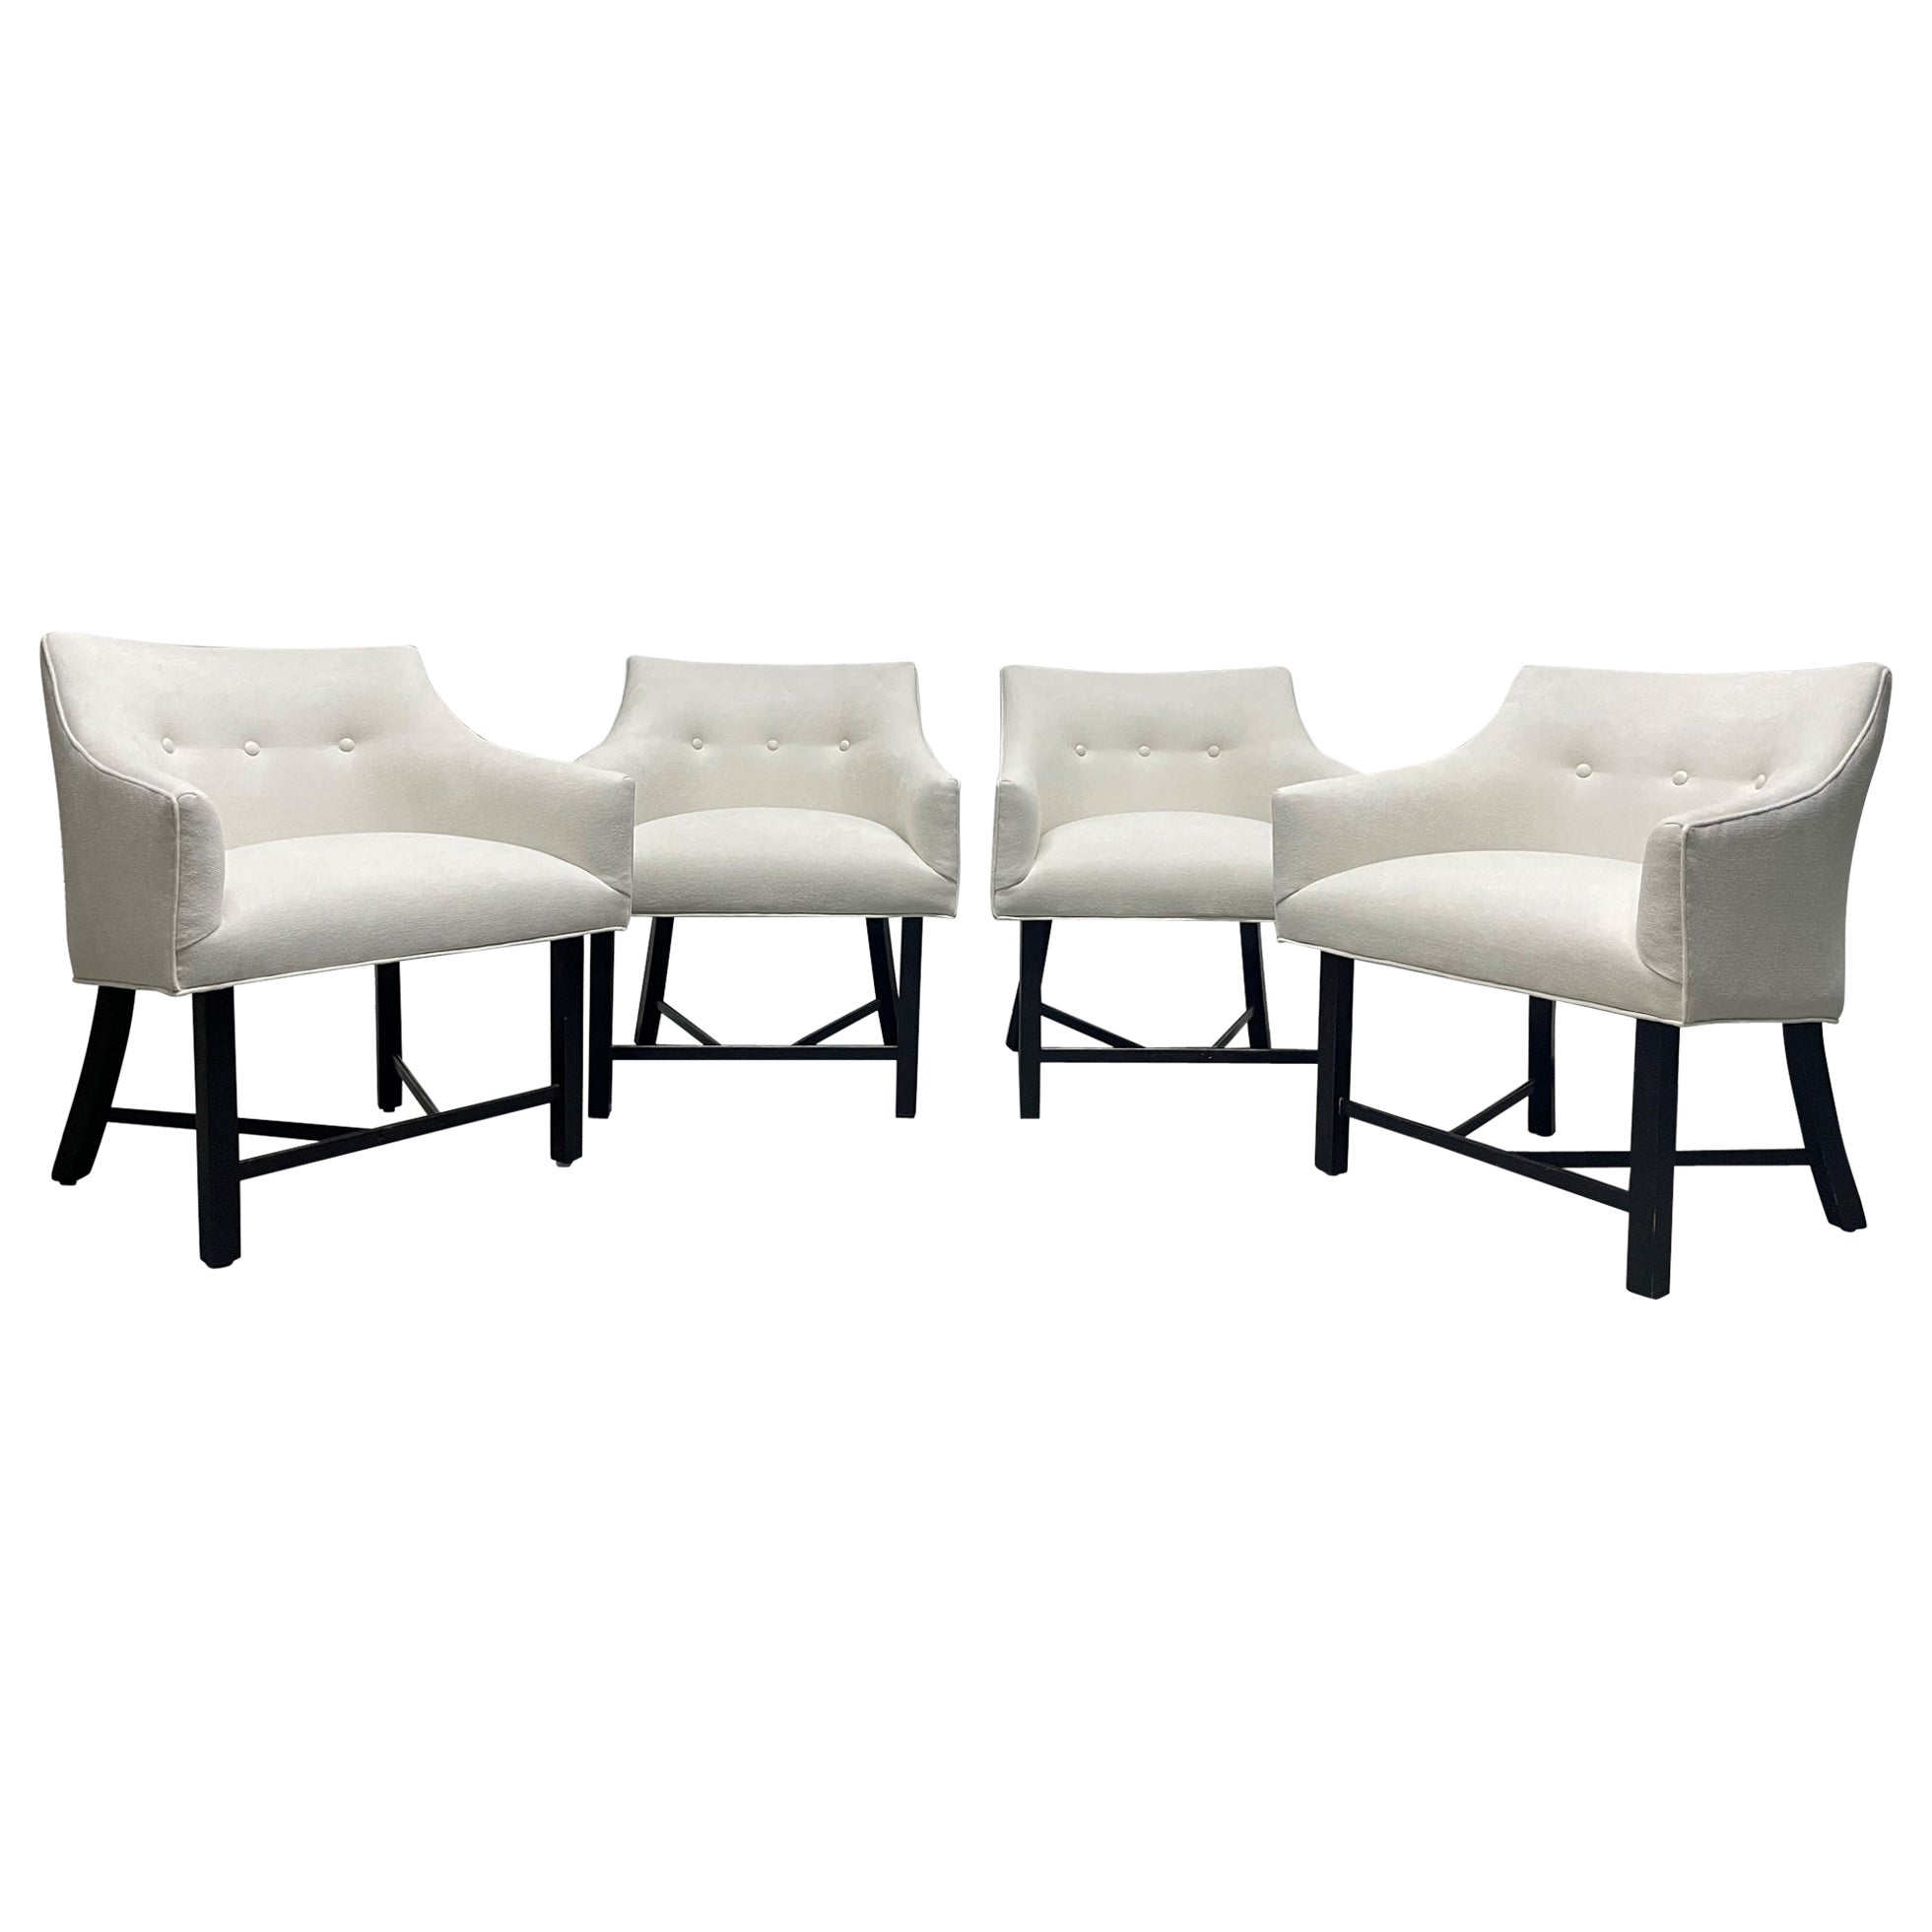 Set of Four Harvey Probber Lounge Chairs